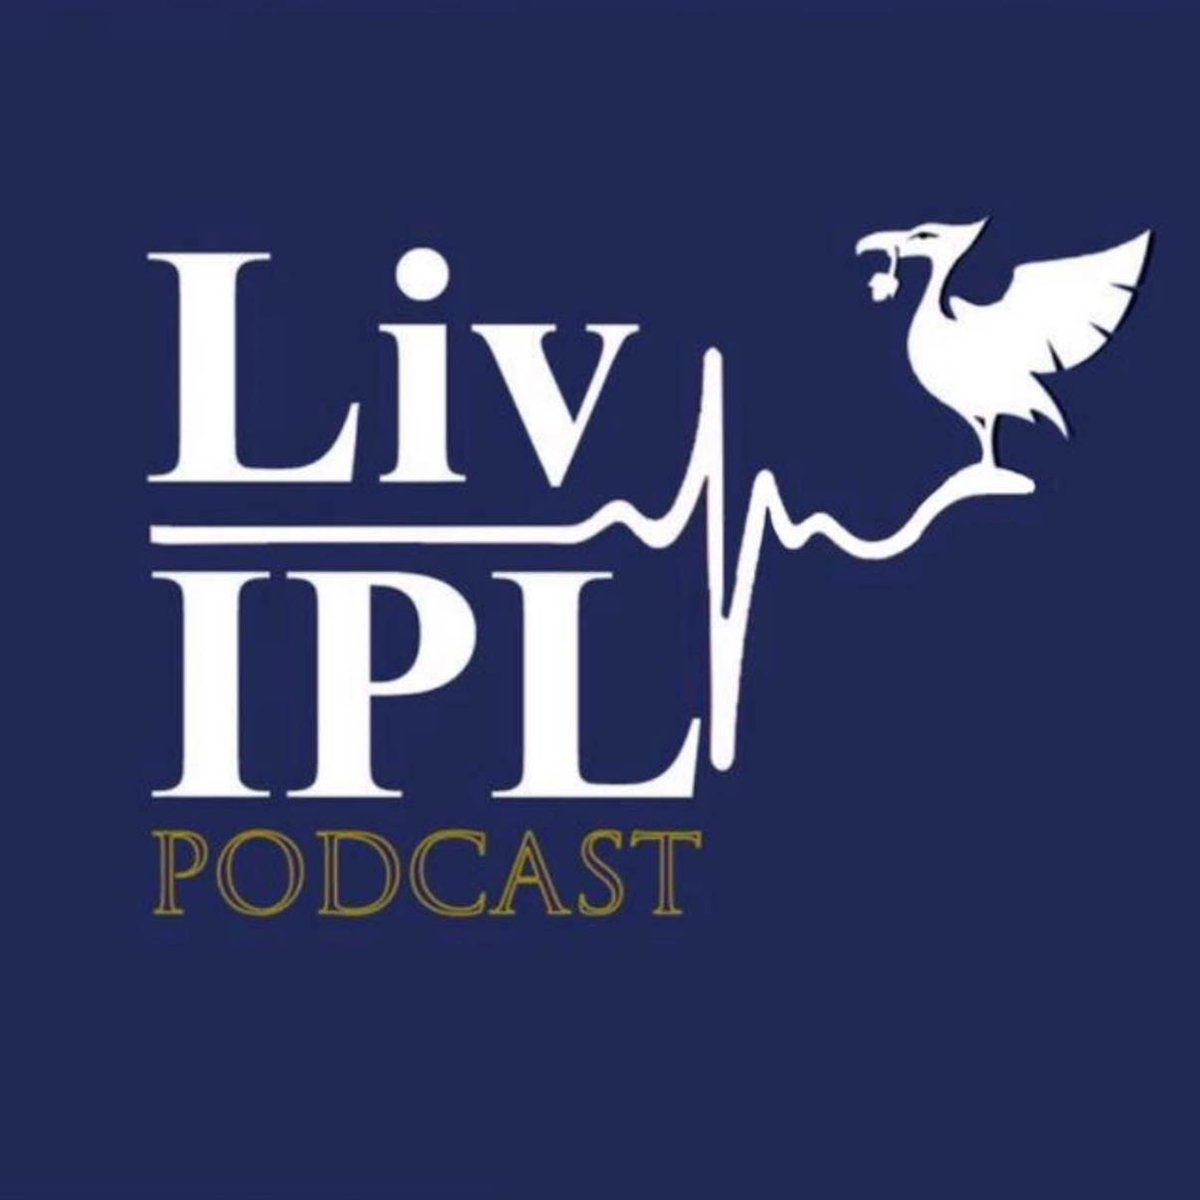 Check out Episode 4 of our @LivUniHealthSci and @LivUniMedicine 'LivIPL' interprofessional learning podcast. This week meet our therapeutic radiography students and learn about what makes them tick and what they eat for dinner...shows.acast.com/the-livipl-pod…